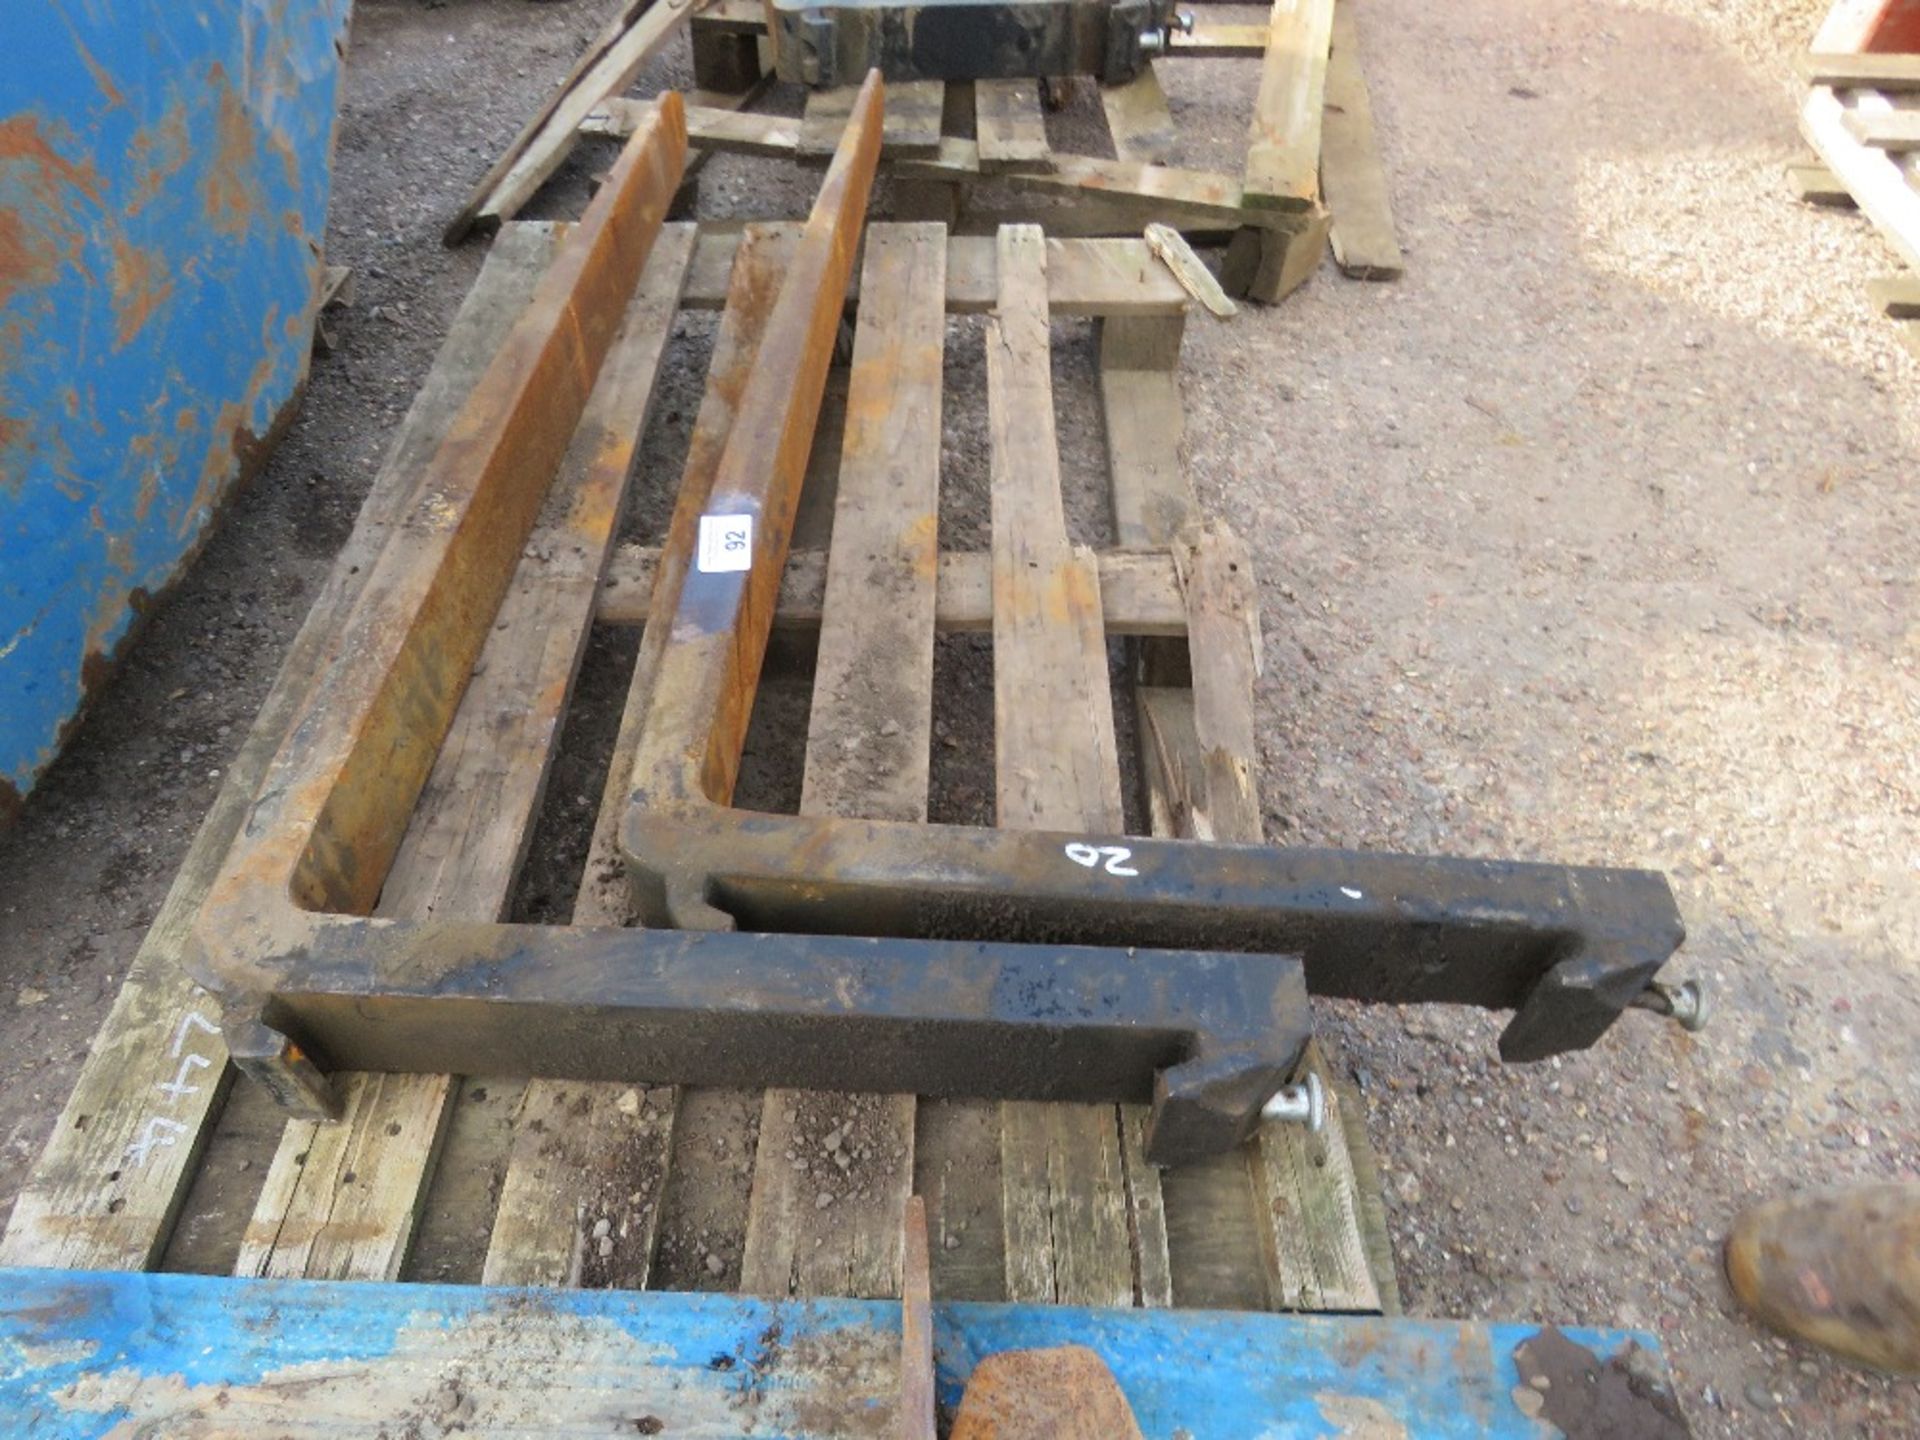 PAIR OF FORKLIFT TINES FOR 20" CARRIAGE. - Image 2 of 3